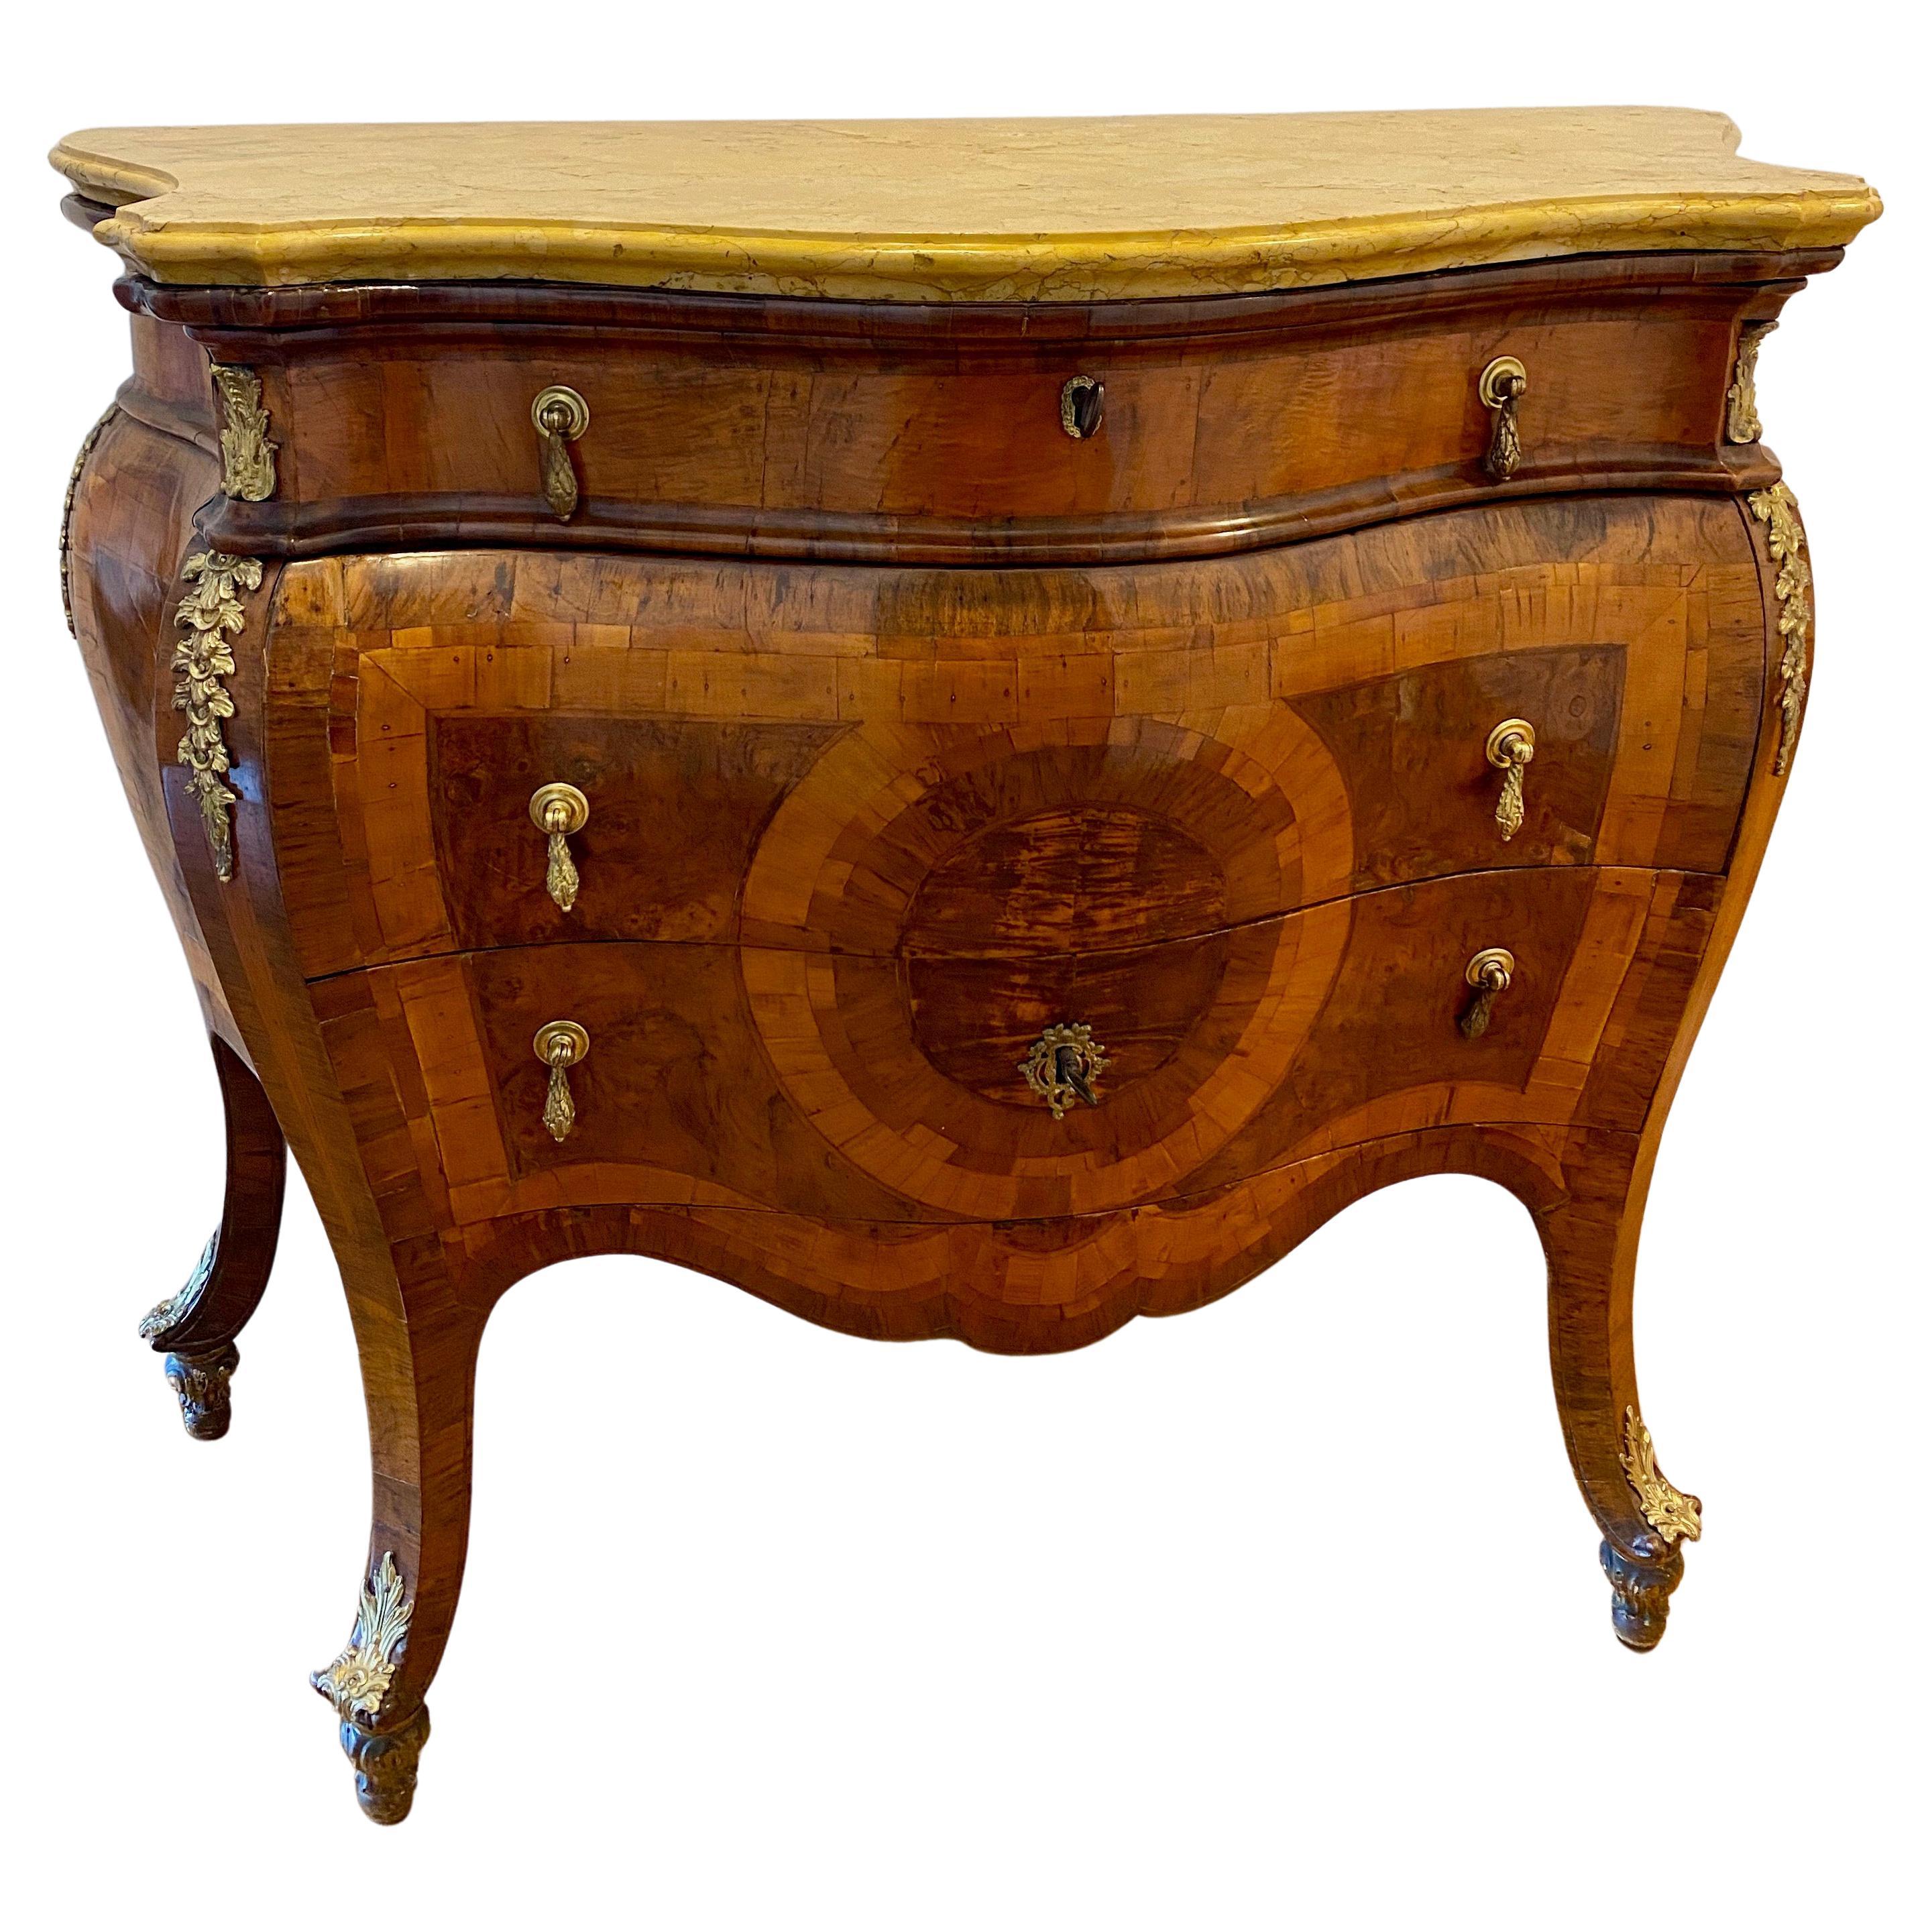 Italian Louis XV Roman Bombe' Shaped Commode with Original Marble Top, 1730 For Sale